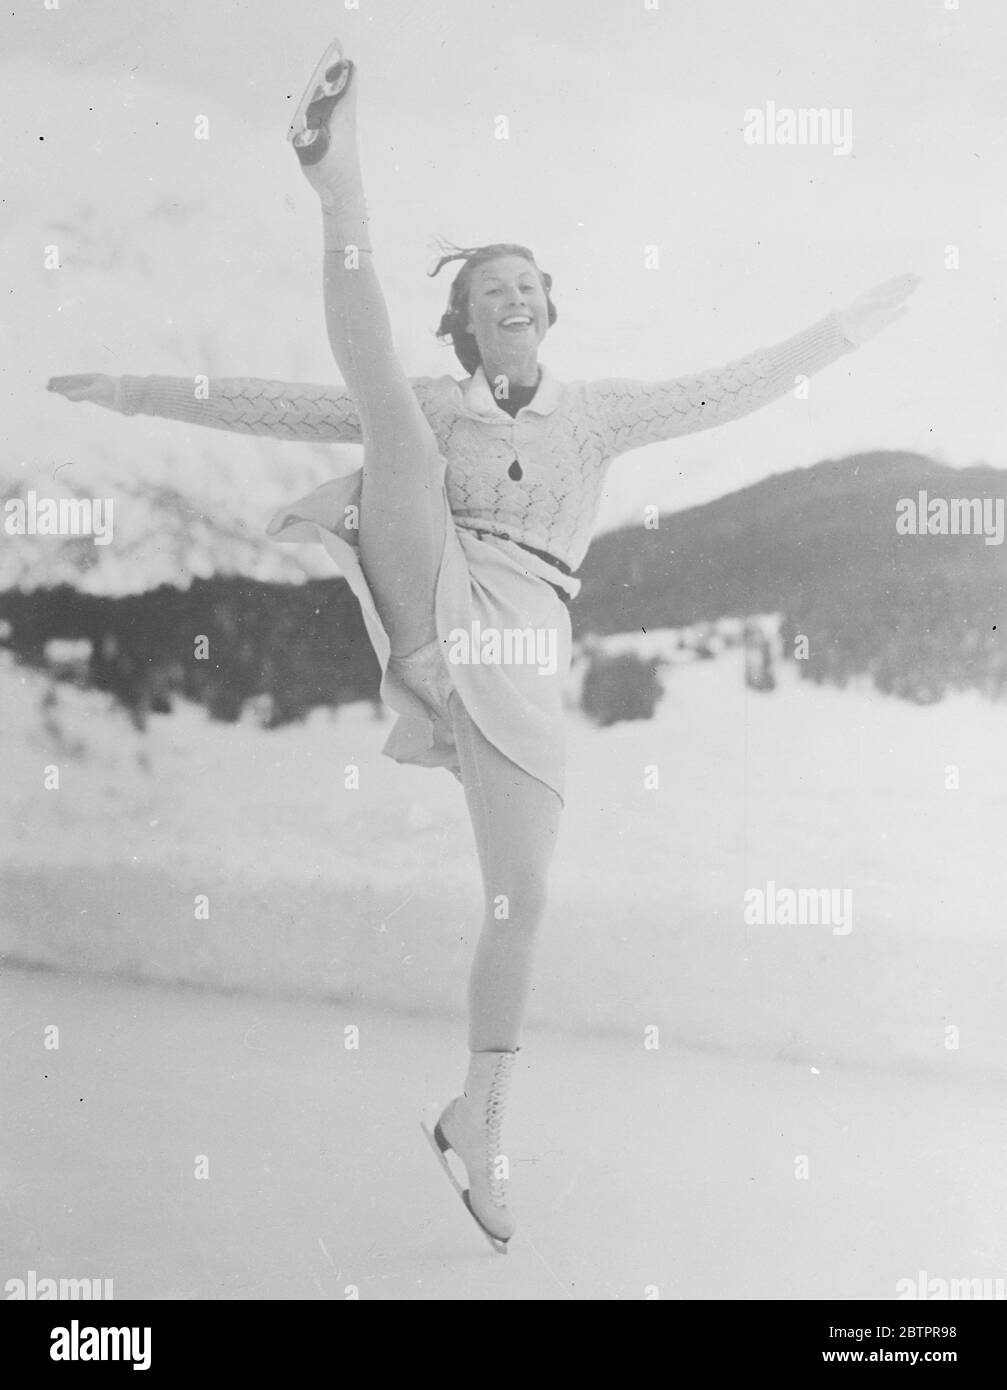 Cecilia Colledge kicks high. Preparing for European figure Skating Championships at St Moritz. Leading figure skaters from all over Europe, including Cecilia Colledge, the British holder of the world title, are now in training at St Moritz, Switzerland, for the forthcoming European Championships. Photo shows, Cecilia Colledge in a gay moment on the ice at St Moritz. 18 January 1938 Stock Photo